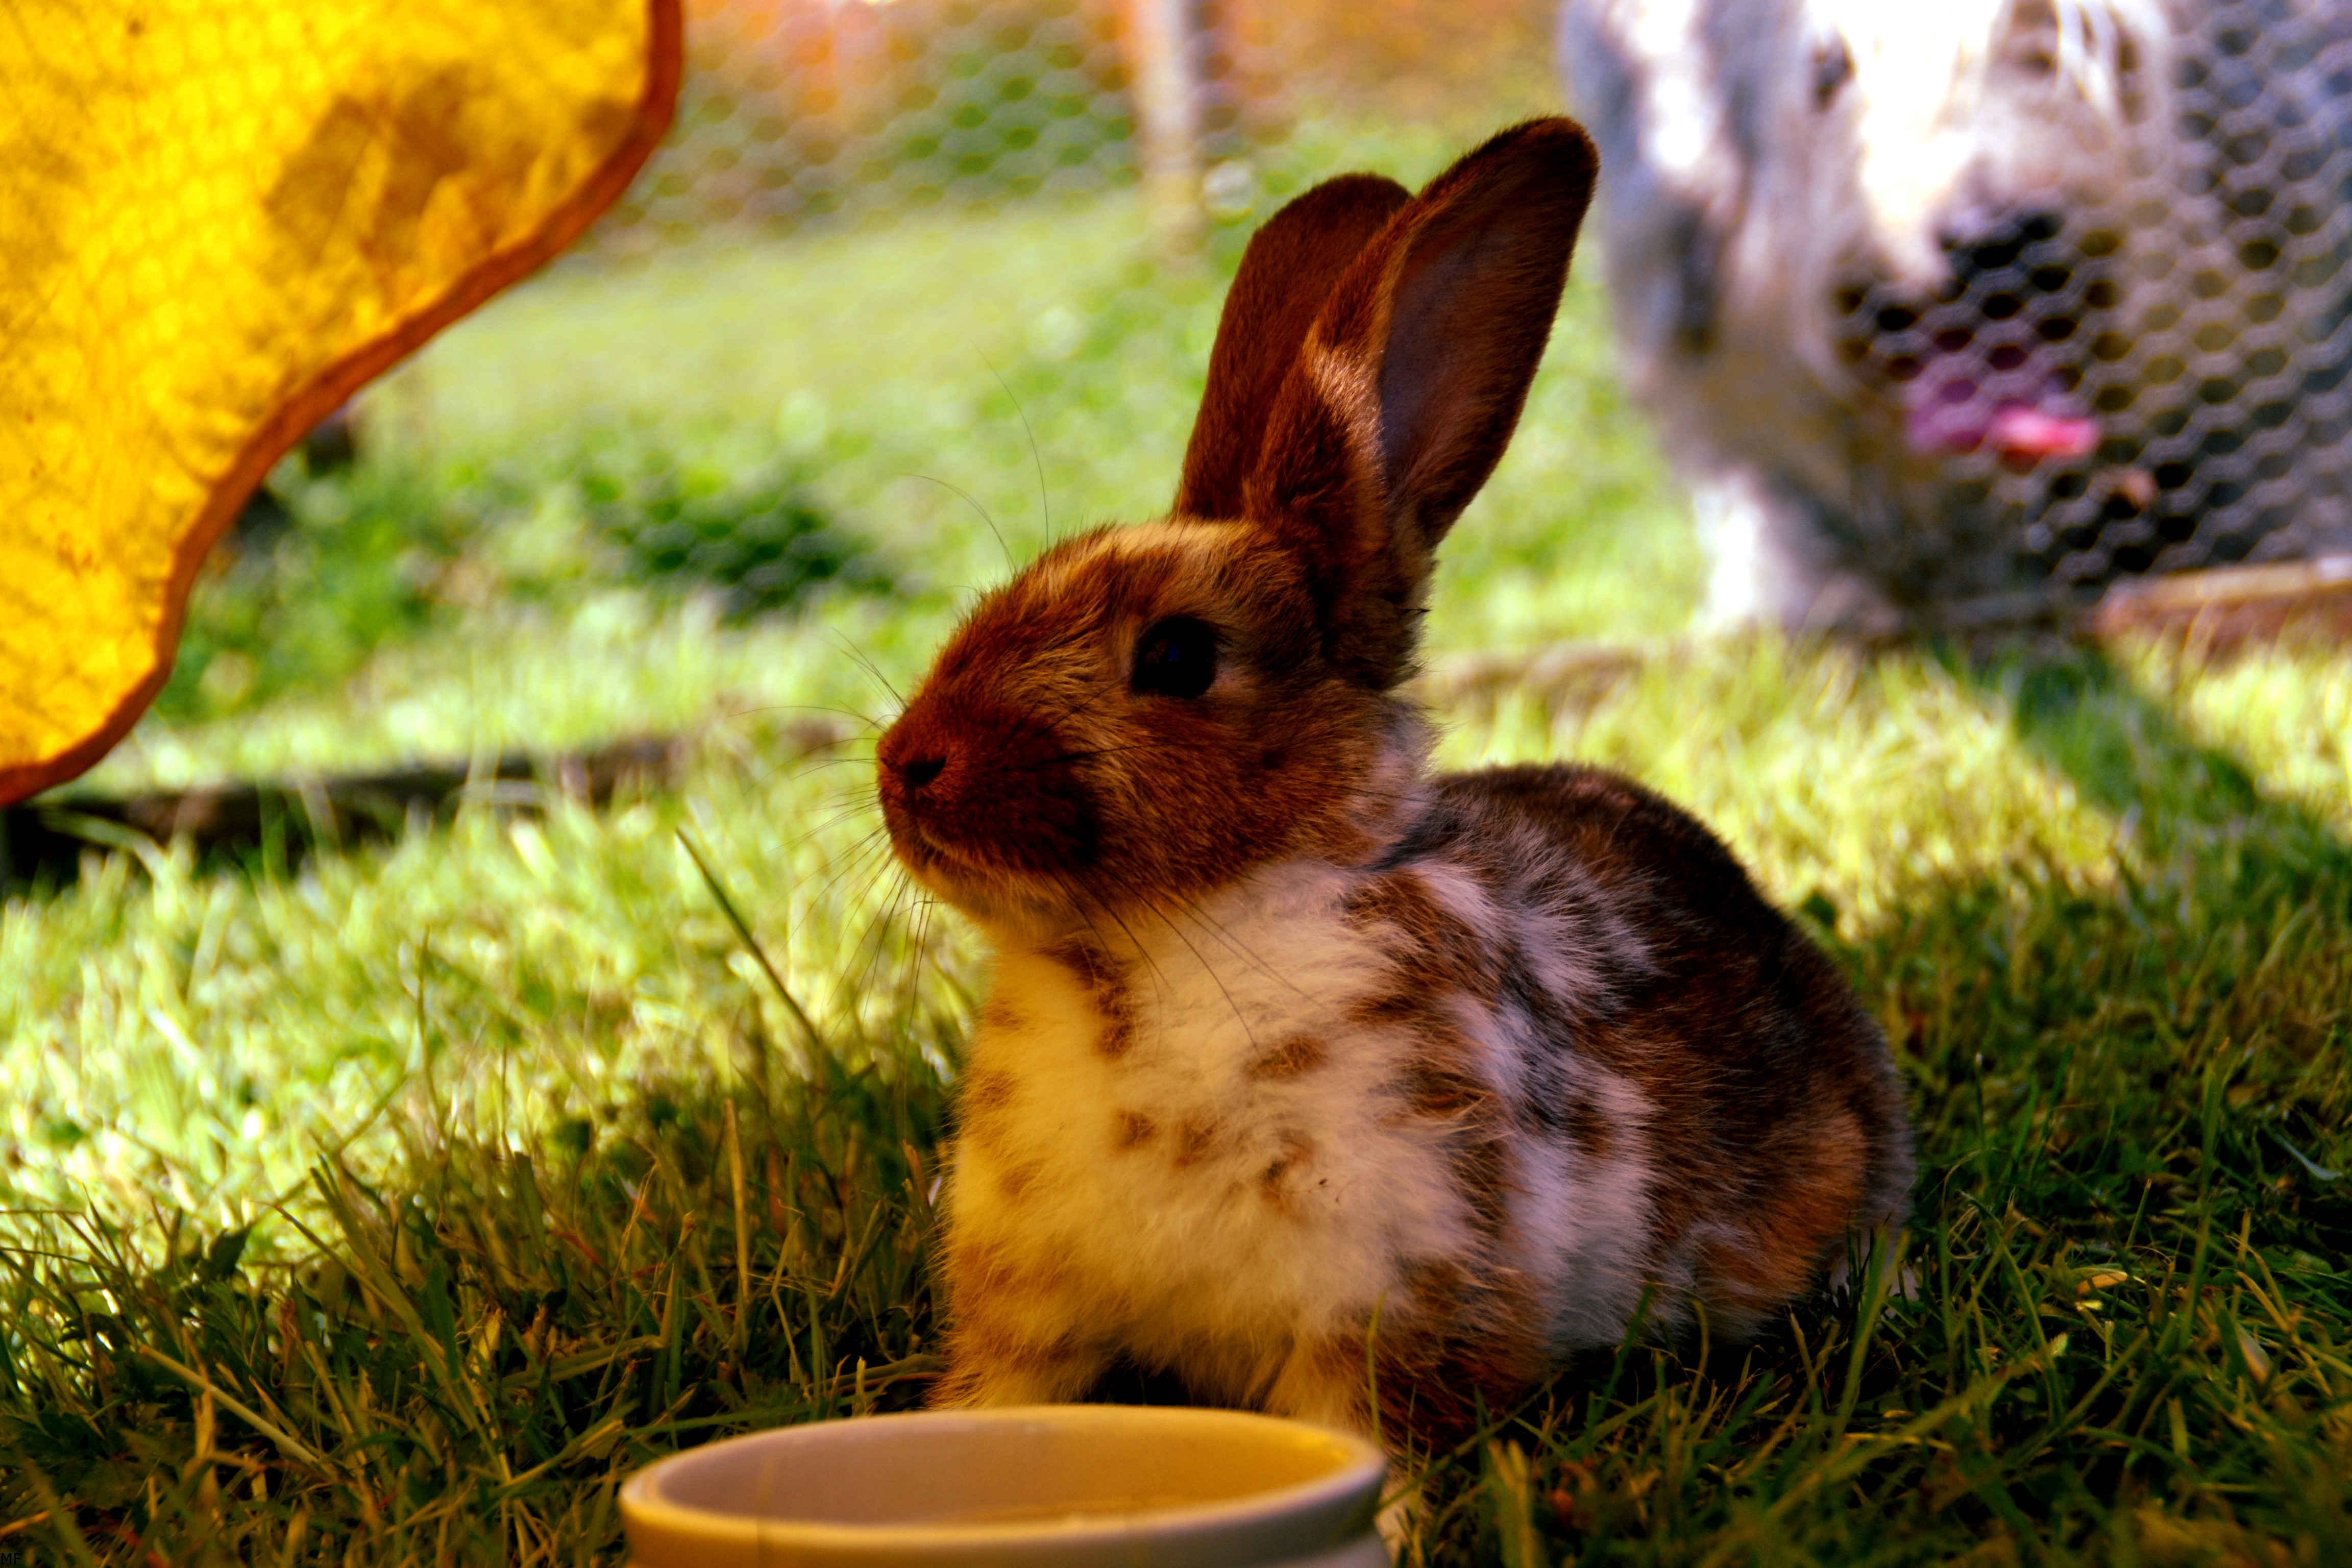 brown and white rabbit standing beside white ceramic bowl on grass field